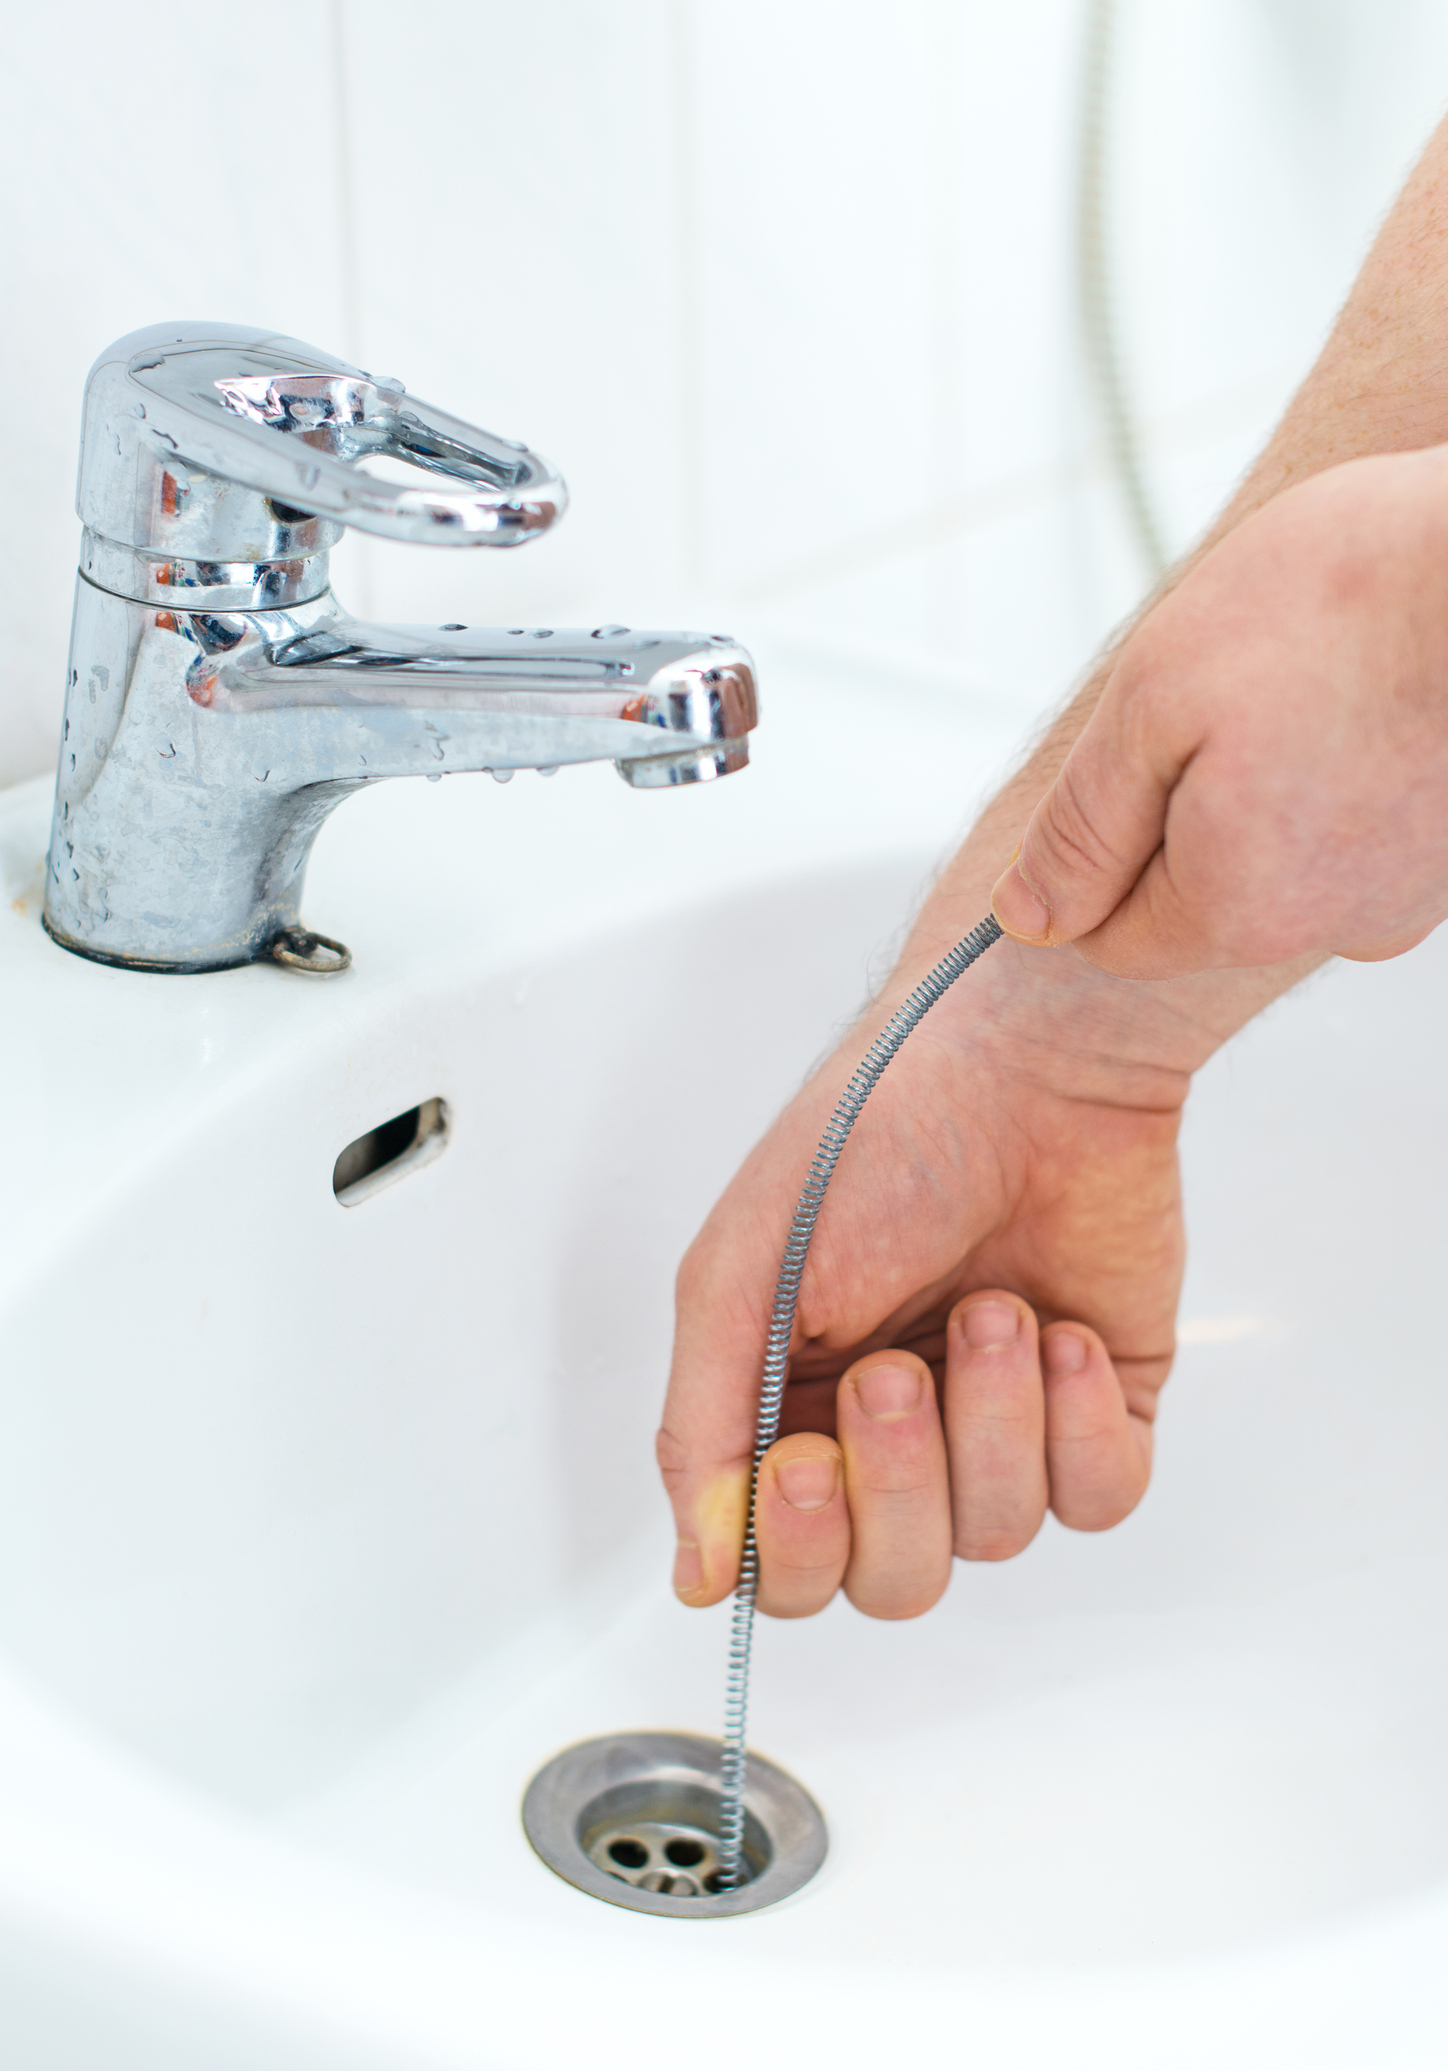 Close up image o someone using a bathroom snake to unclog a bathroom sink